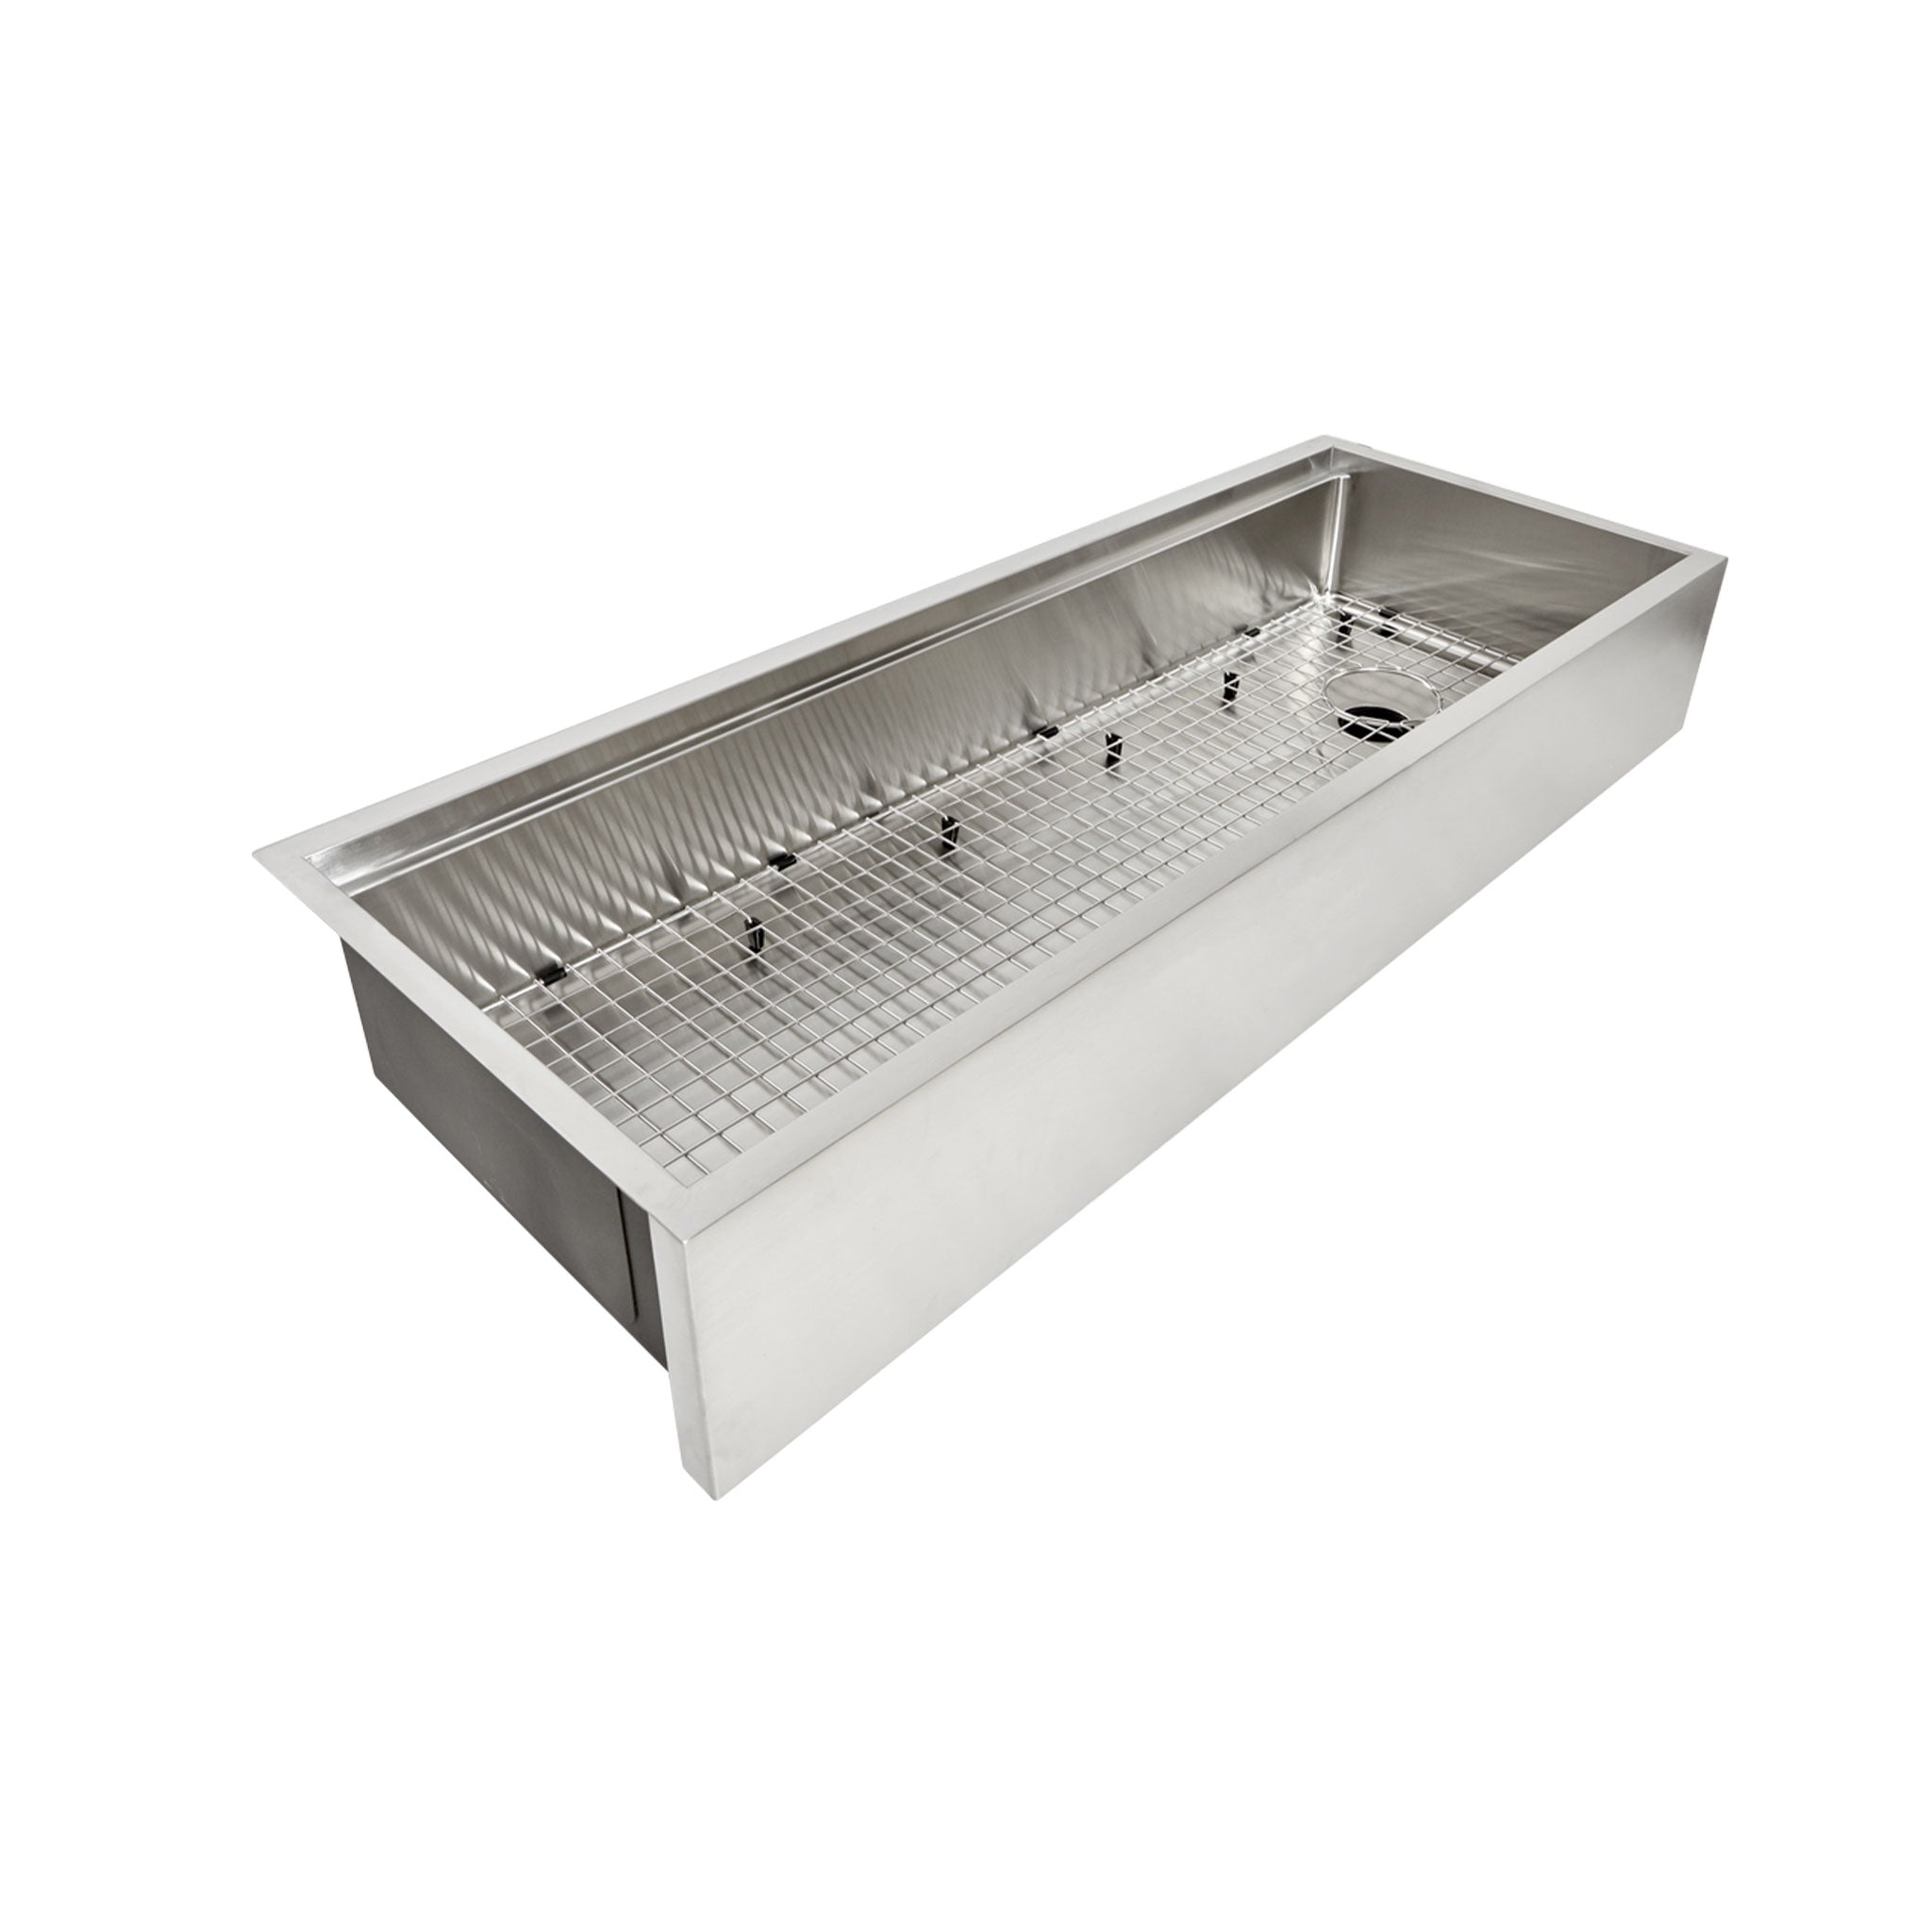 Farmhouse style fifty inch stainless steel workstation sink with offset drain and built in ledge for sink accessories